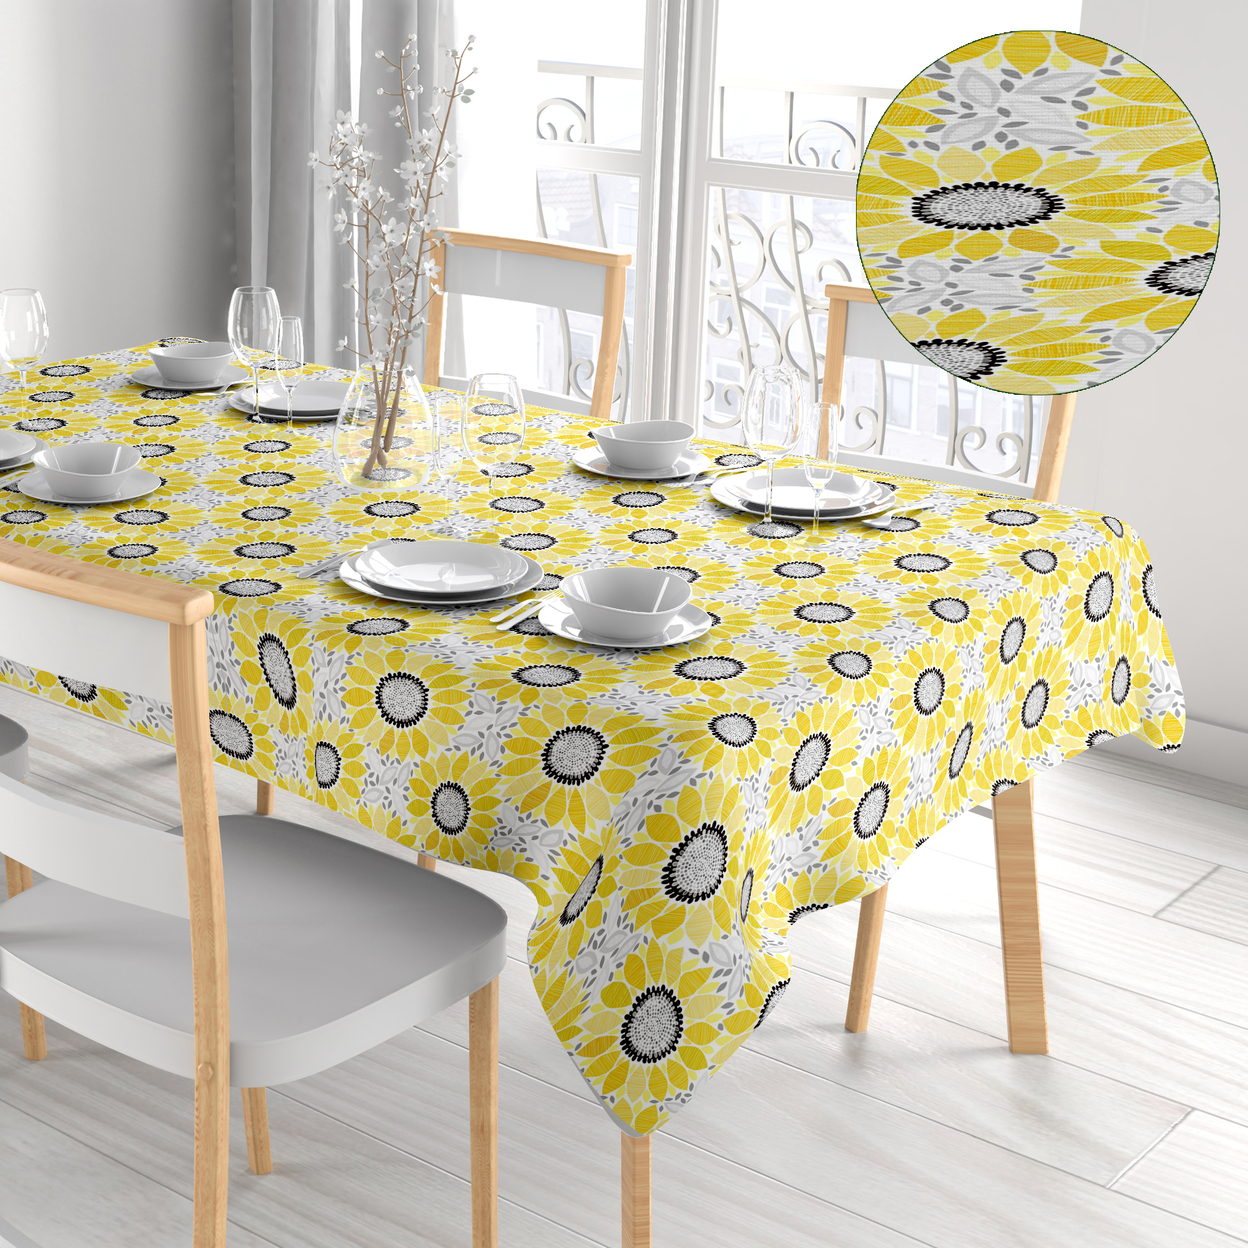 2-Pack: Kitchen Dining Water-Resistant Oil Proof Flannel Back PVC Vinyl Tablecloth - 52'' X 90'', Print